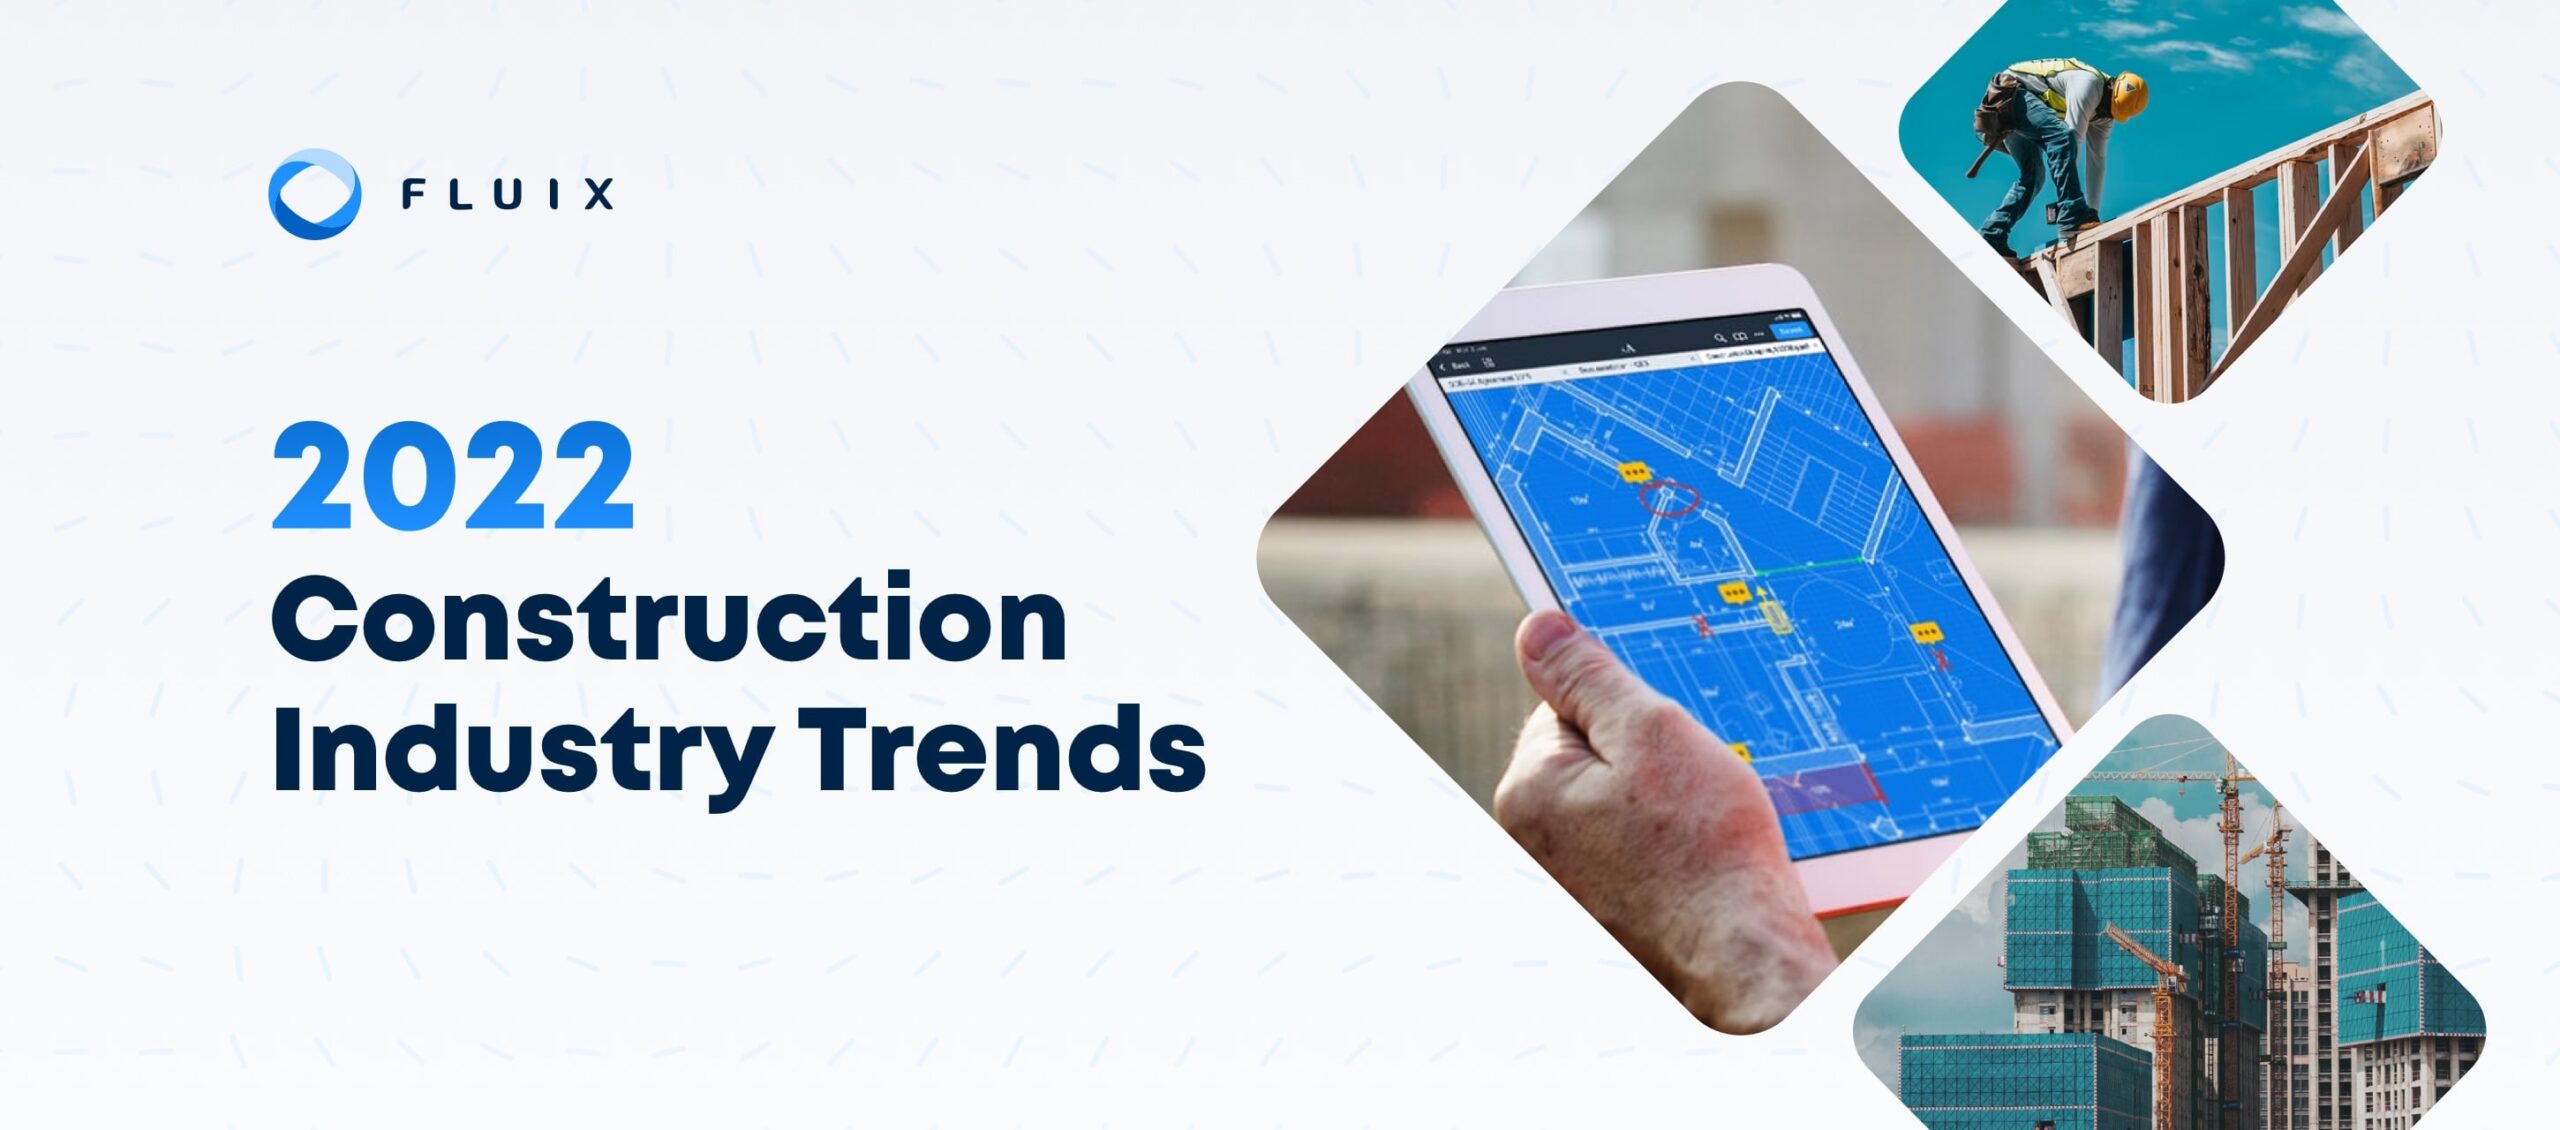 AEC Industry Trends 2022 New Construction Industry Trends